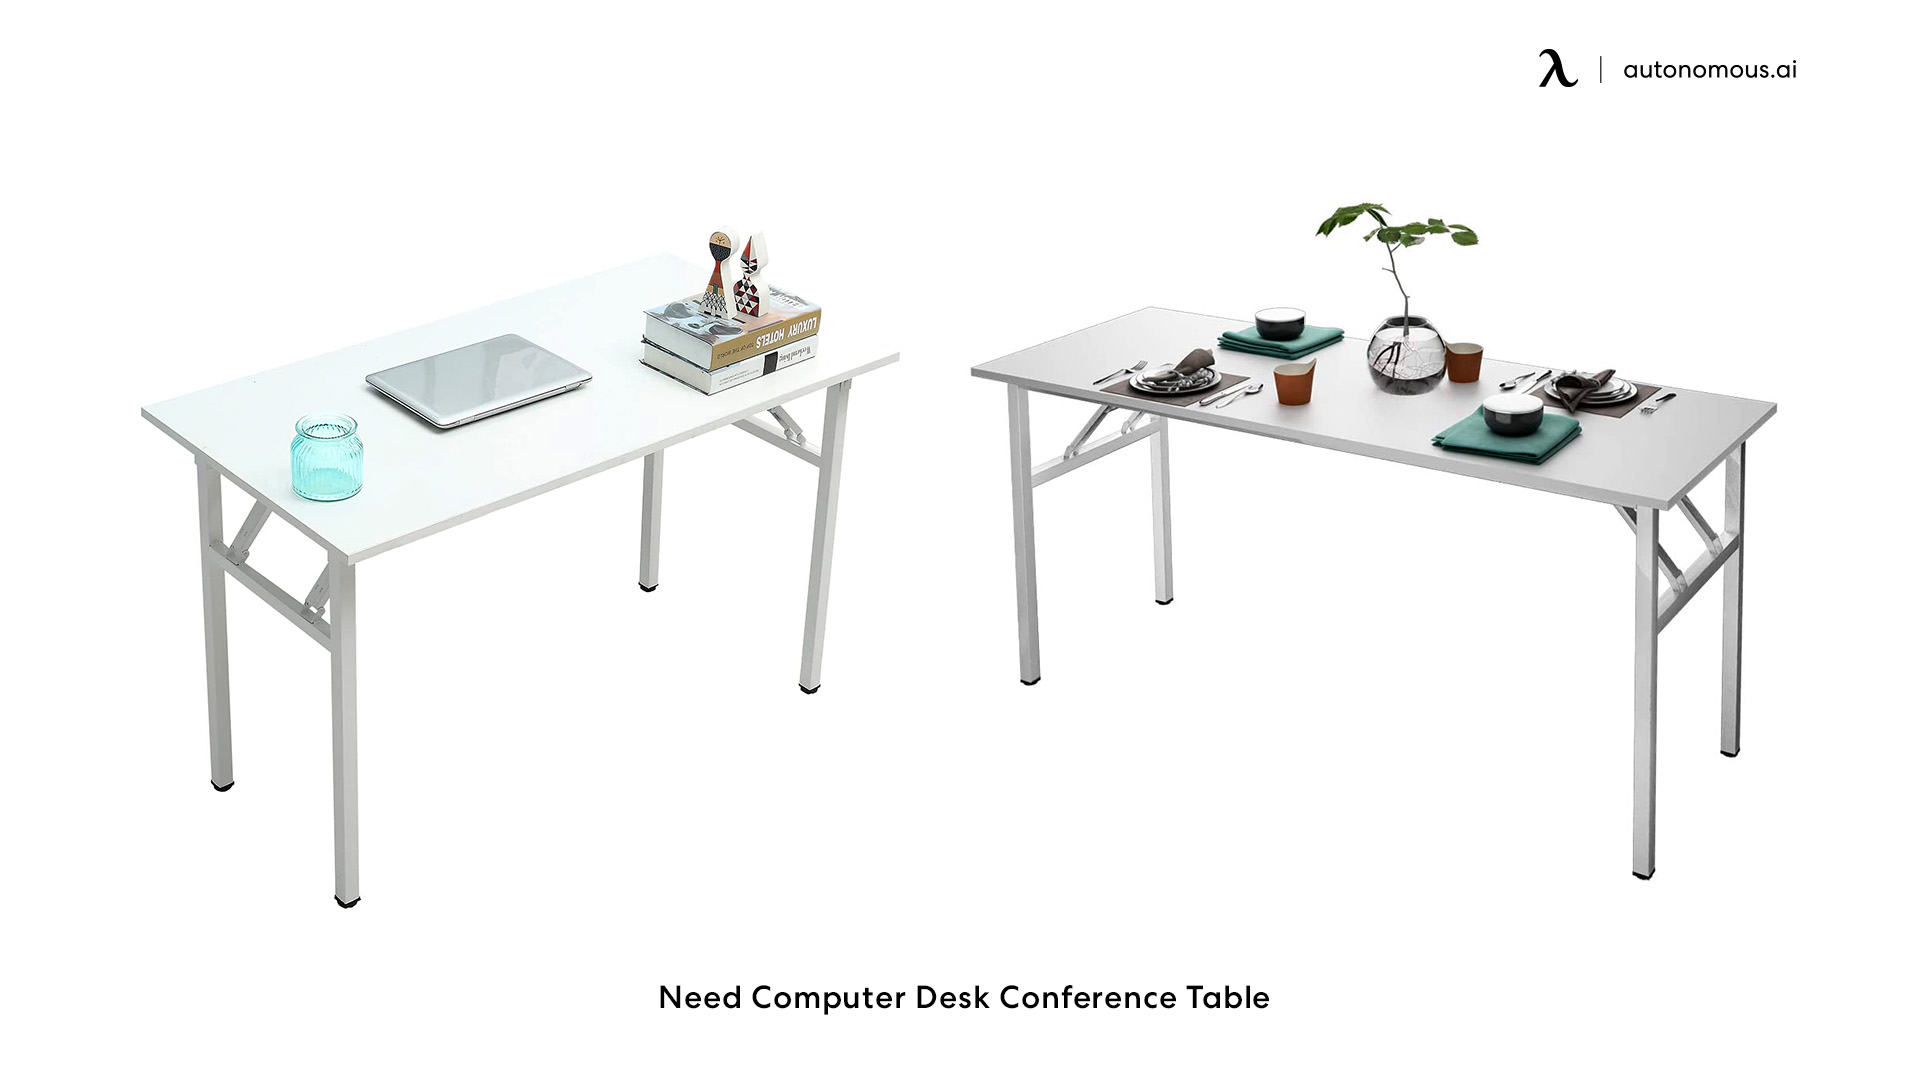 Need Computer Desk Conference Table